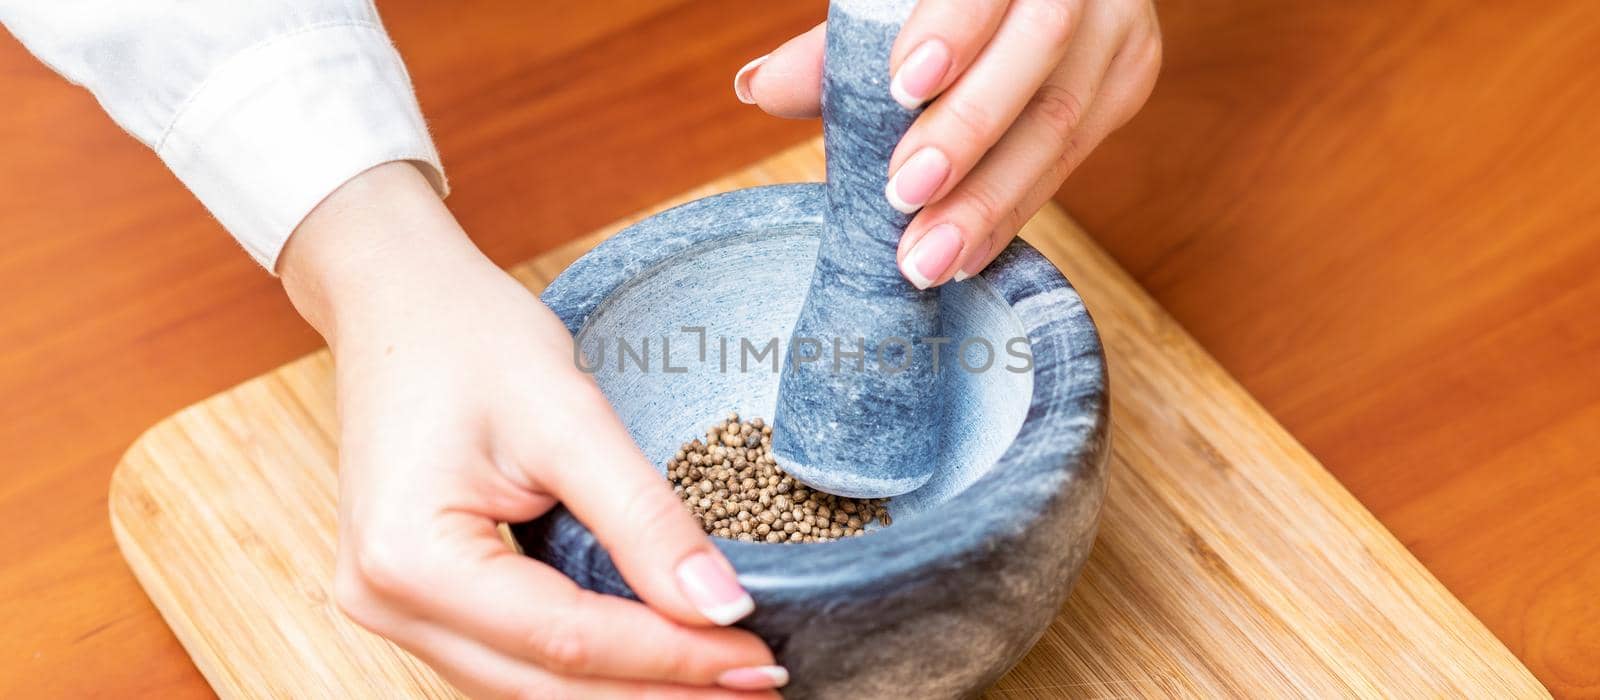 Hands of woman grinding black pepper by pestle in a gray granite mortar on the table.